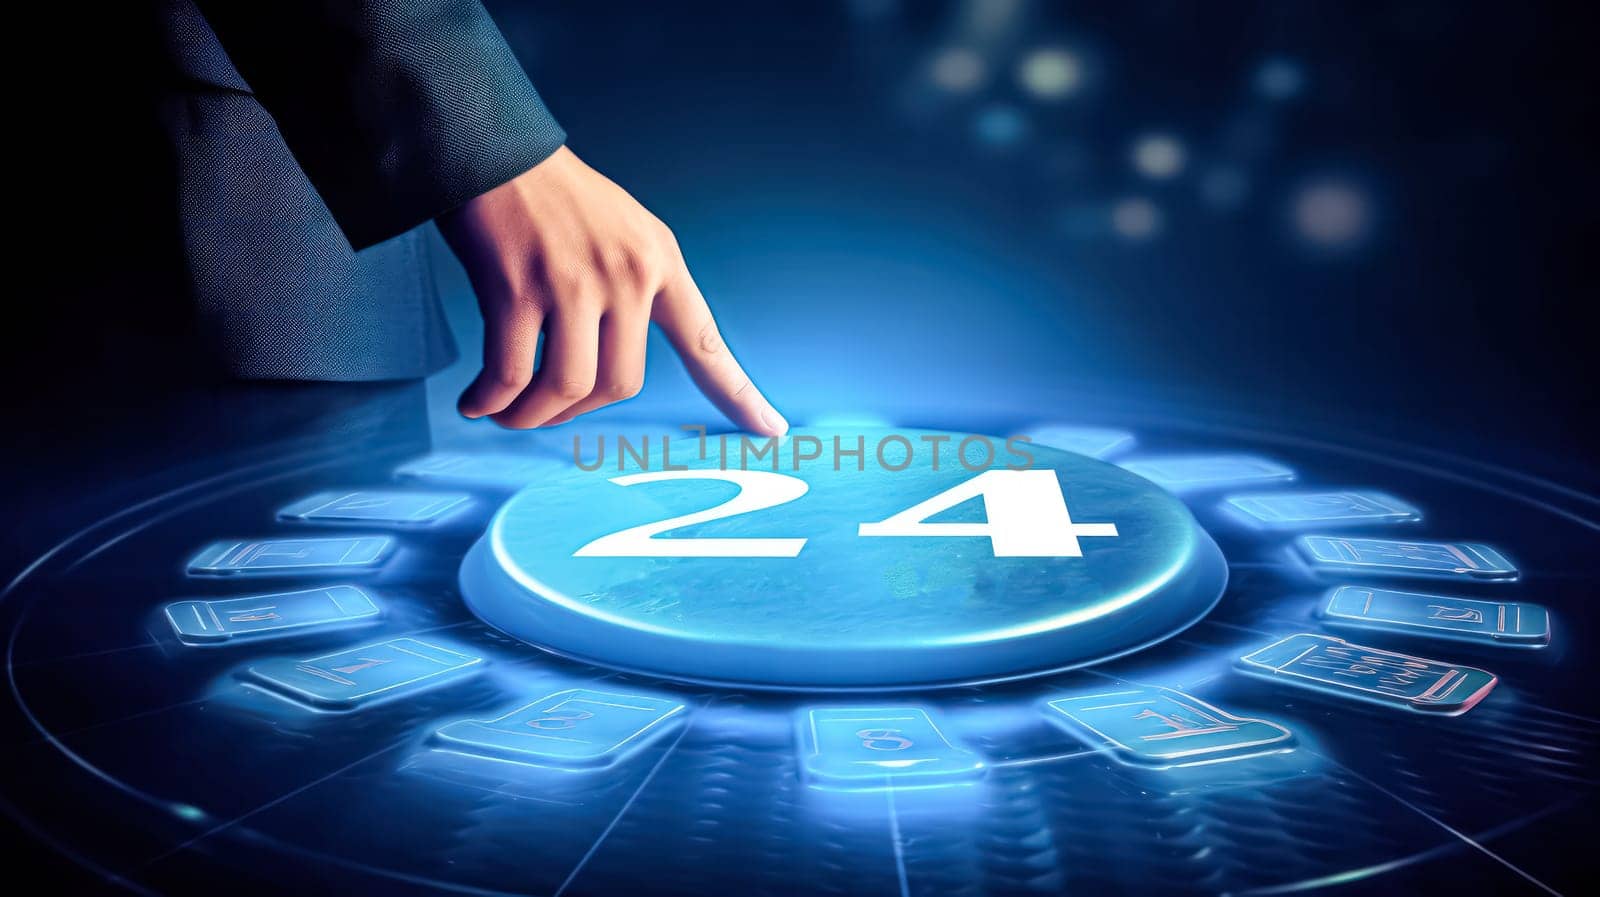 A man is pointing at a computer screen with a blue button in the middle. by Alla_Morozova93